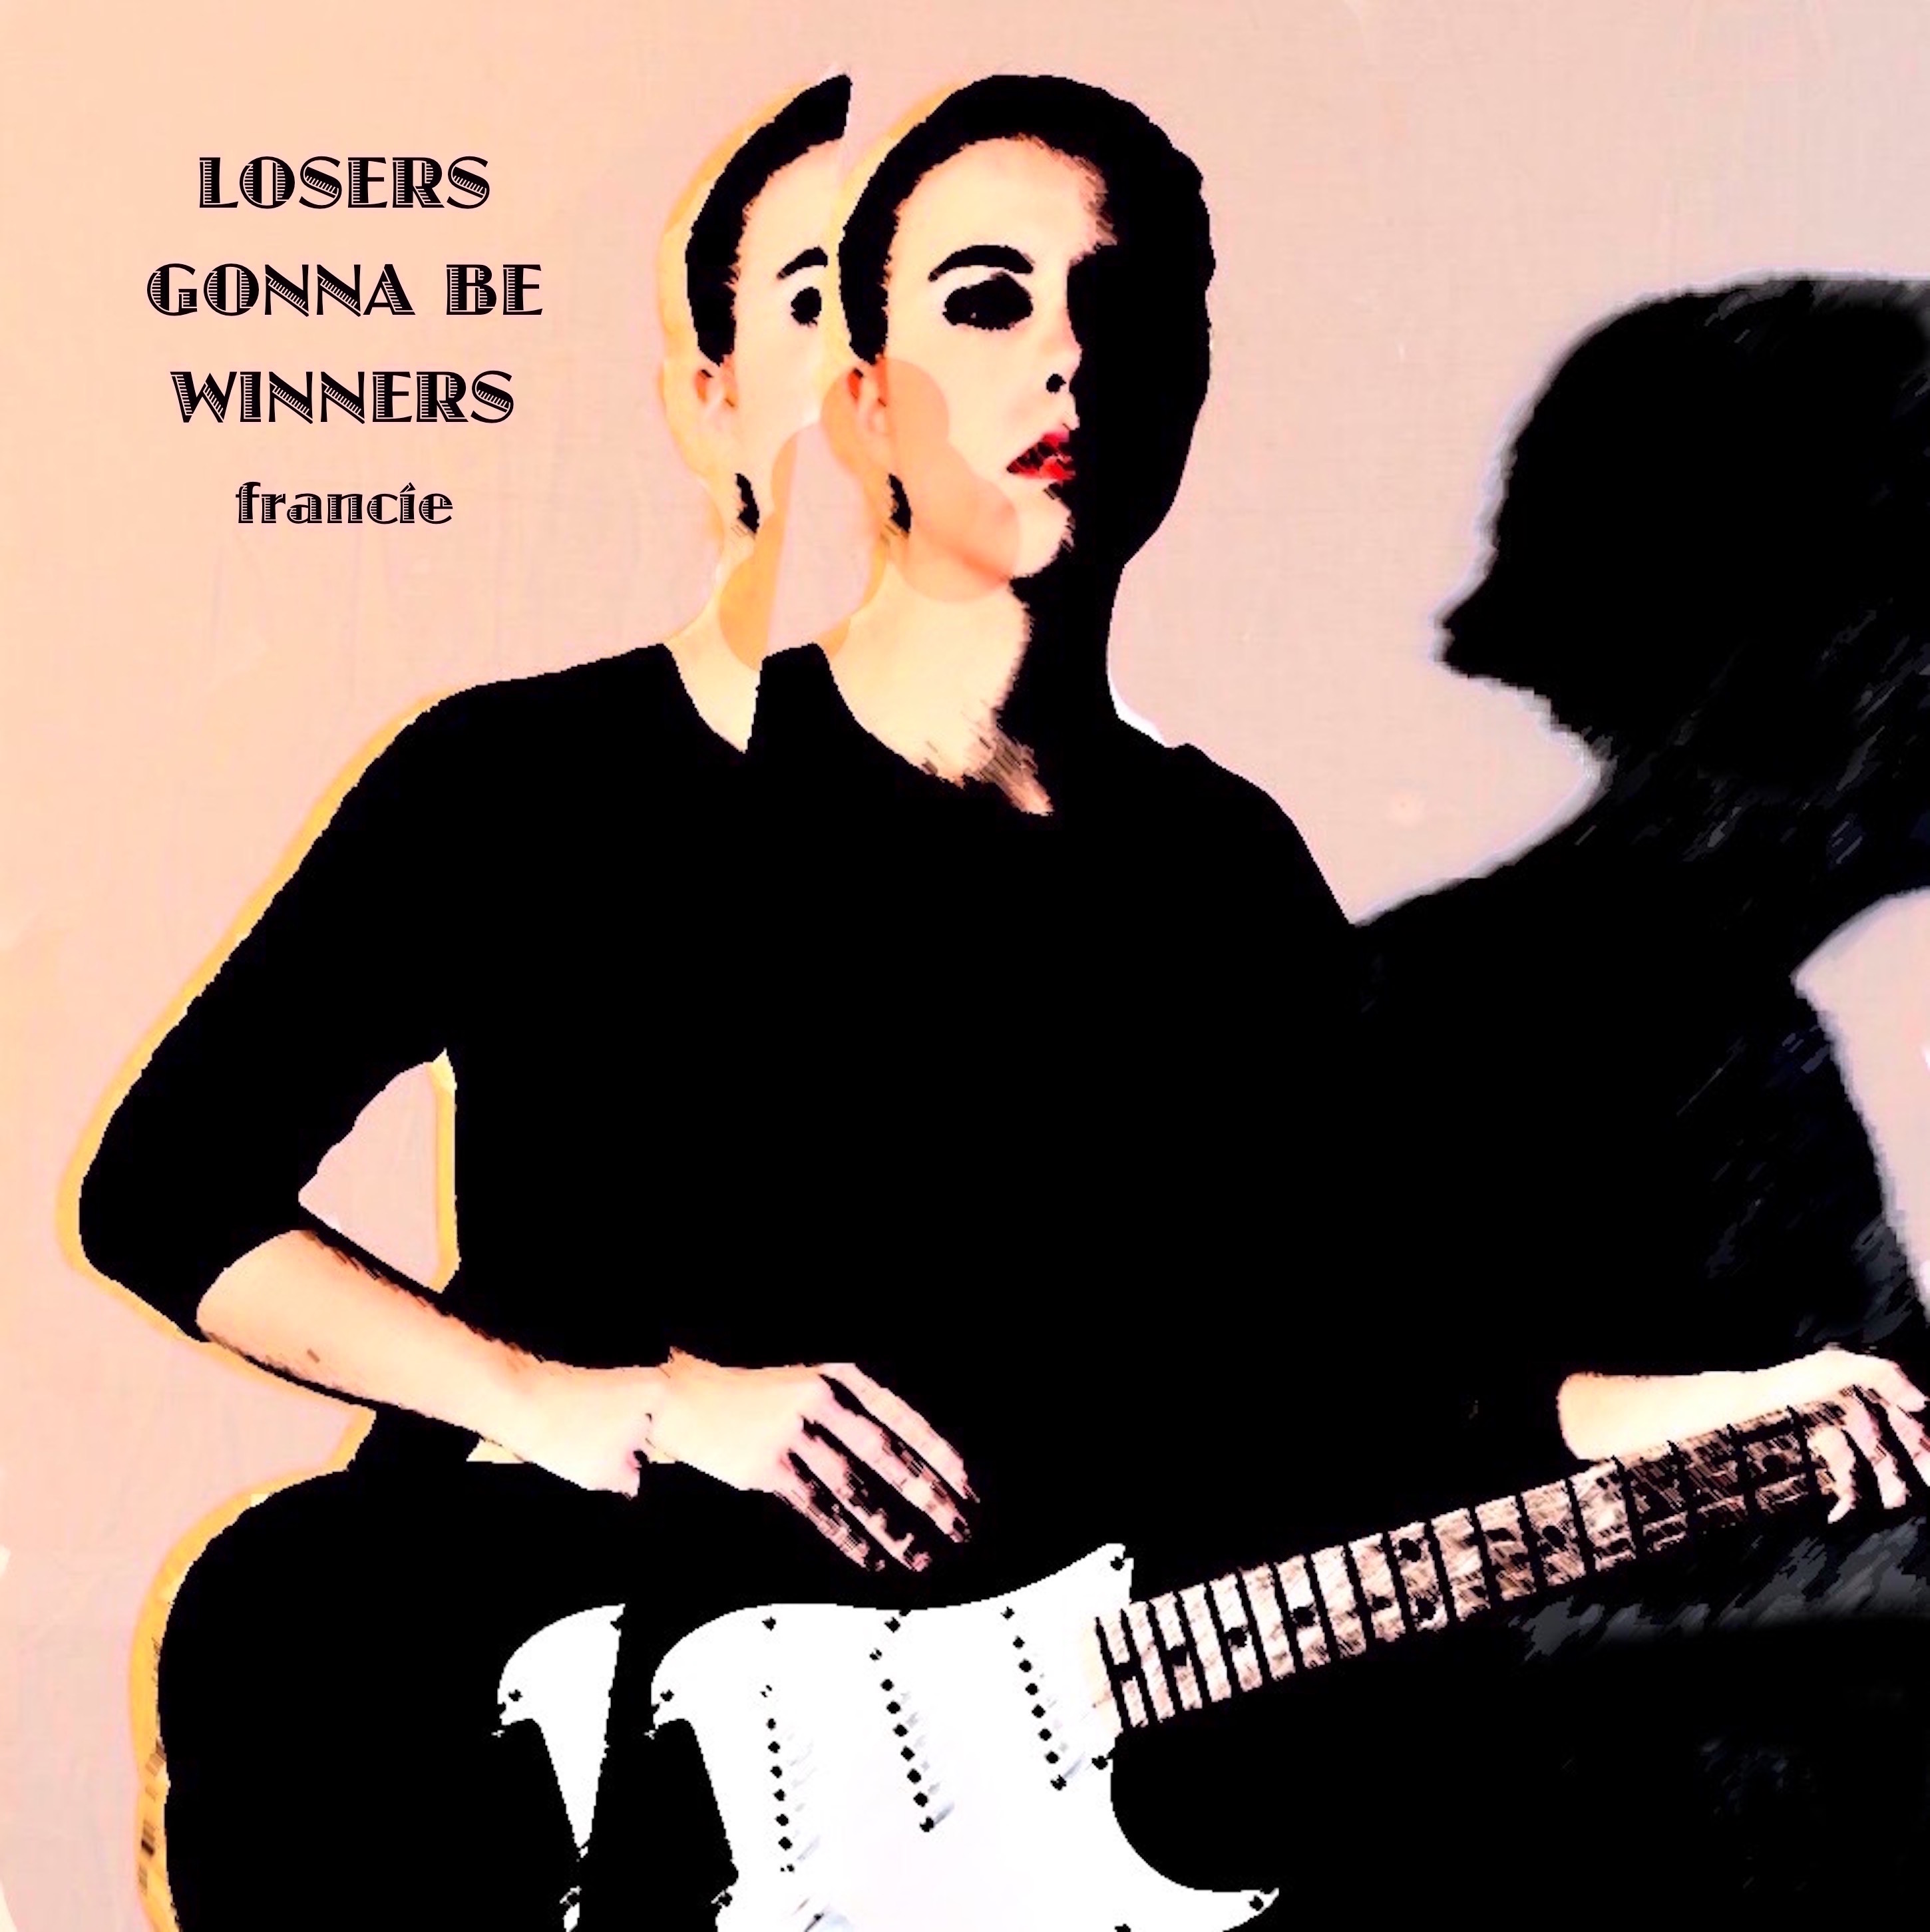 LOSERS GONNA BE WINNERS - COVER ART